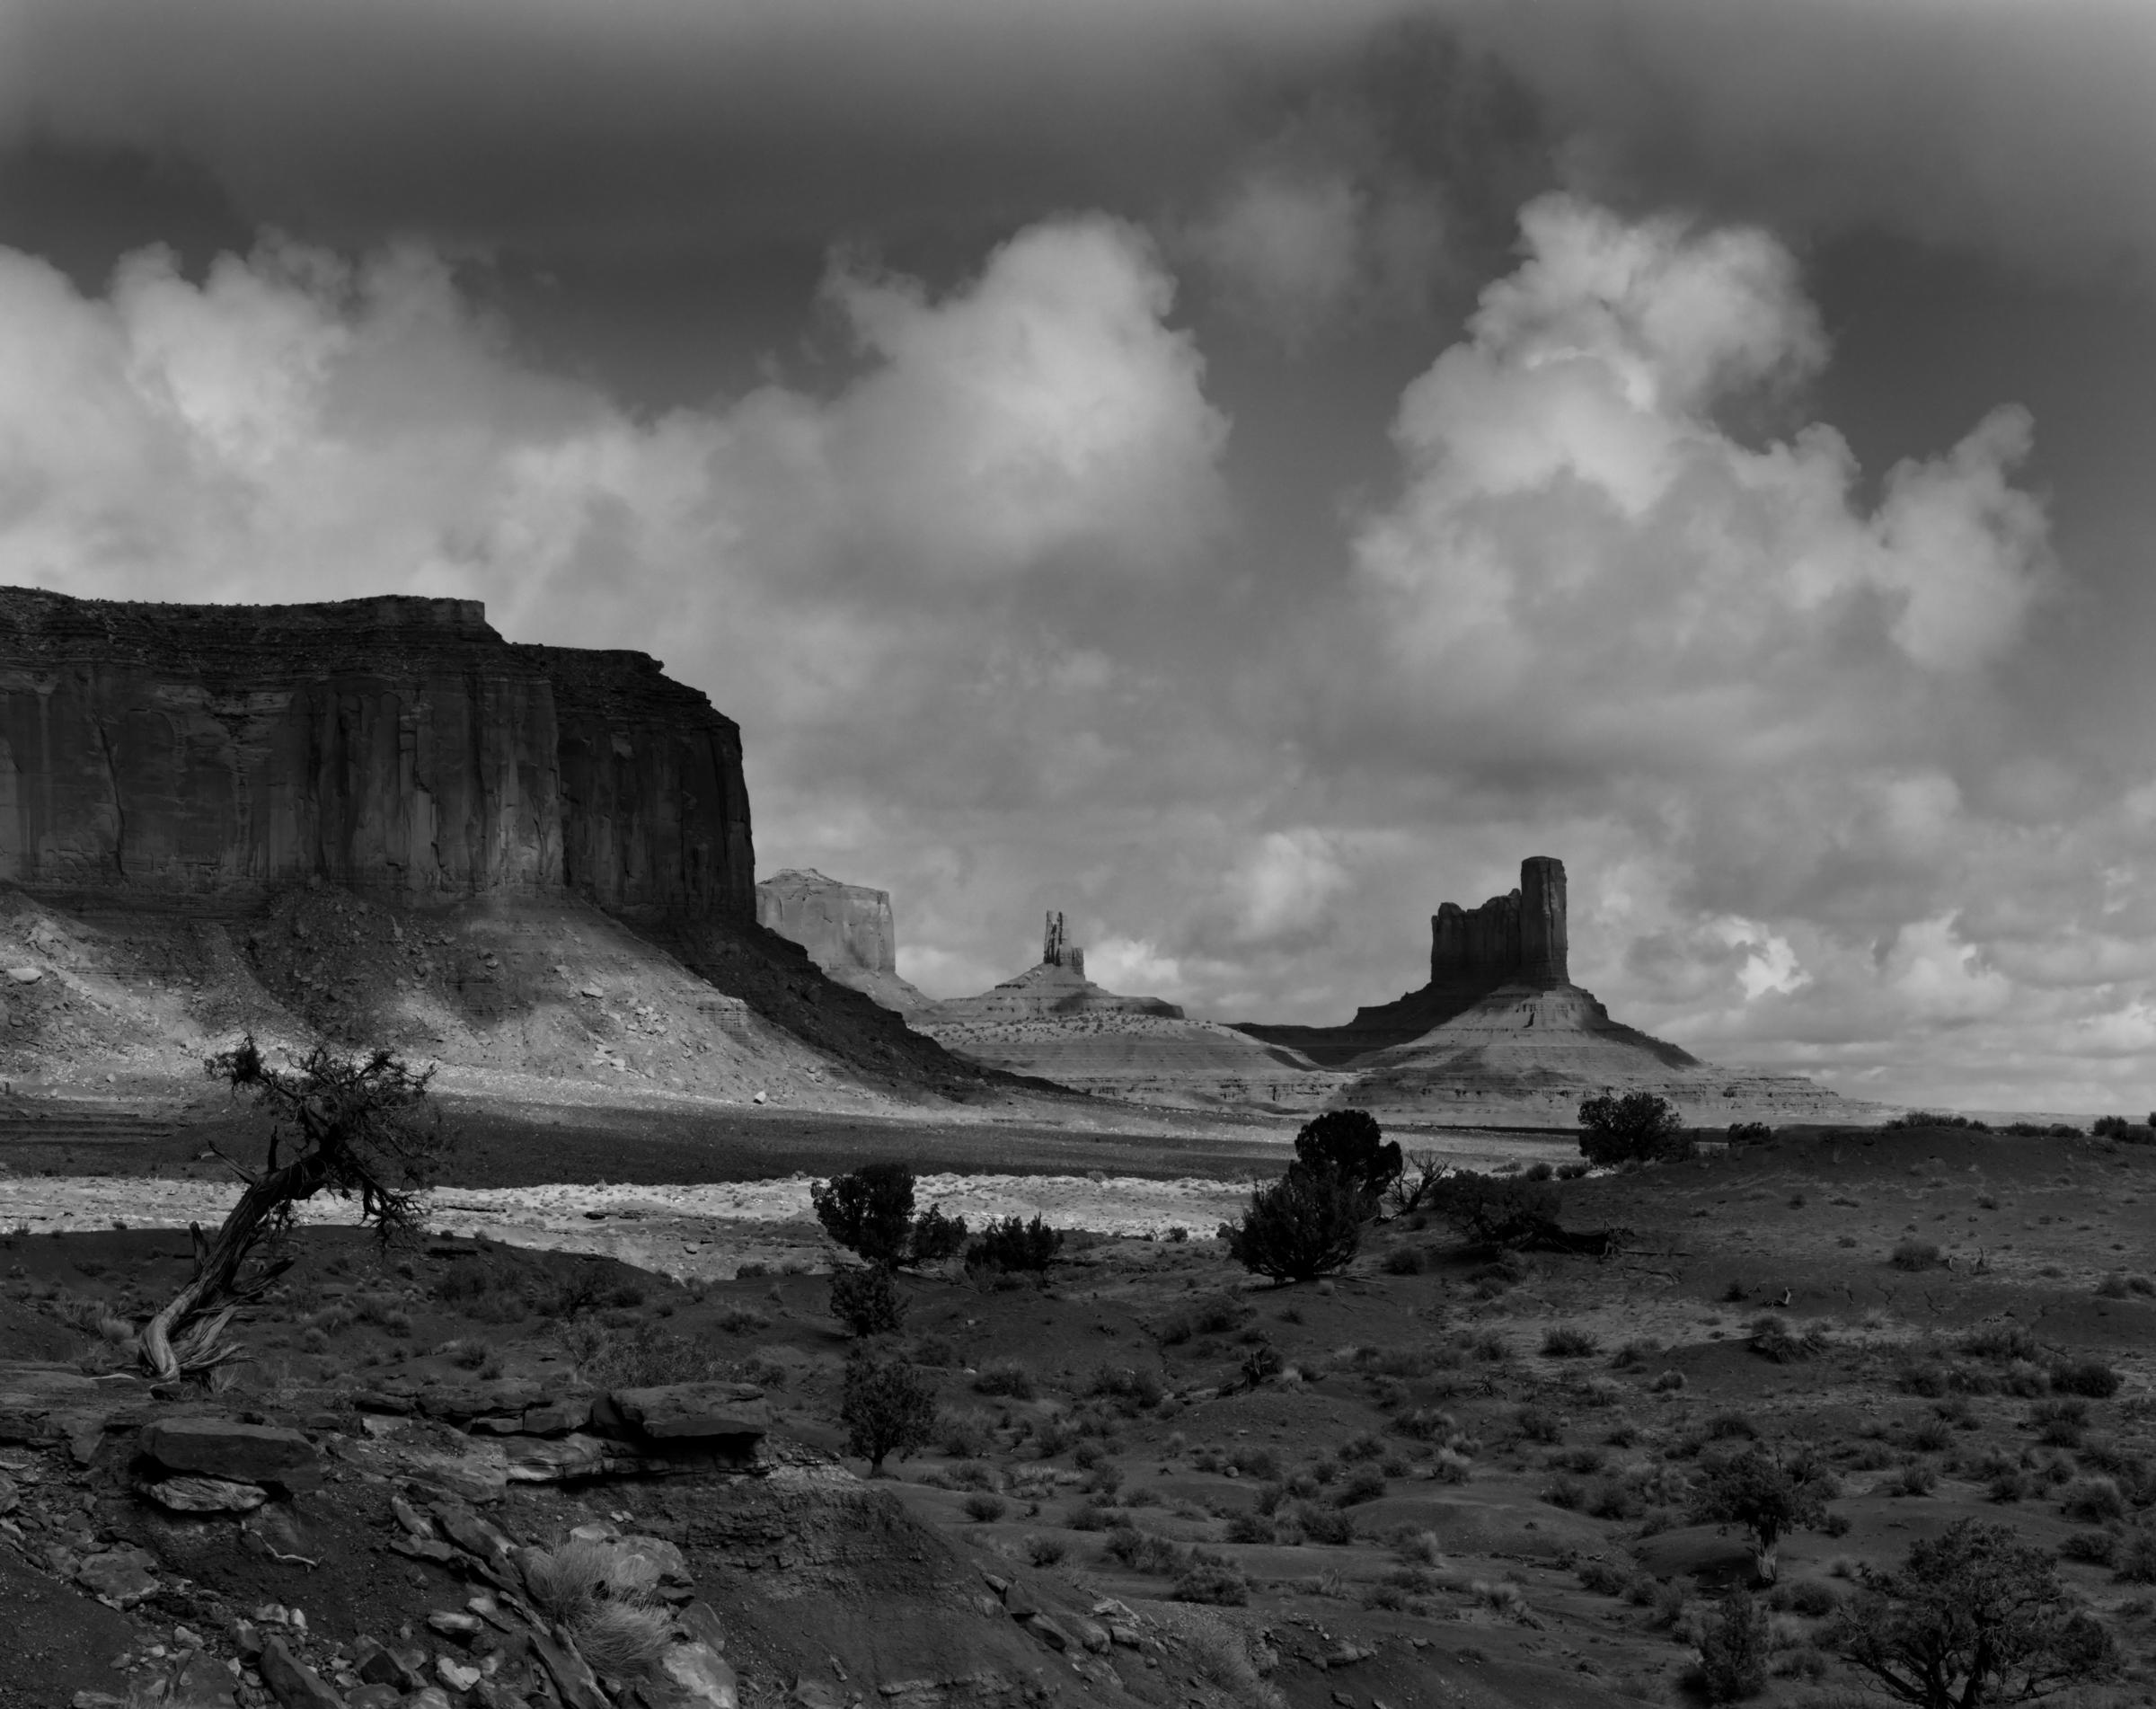 Kurt Markus, Monument Valley, 2002, Image Size: 28.5 x 36". Matted: 39 x 46", archival pigment ink print, edition of 15. Signed and editioned on print recto. Large scale landscape photograph of Monument Valley. Exhibited in Obscura Gallery solo